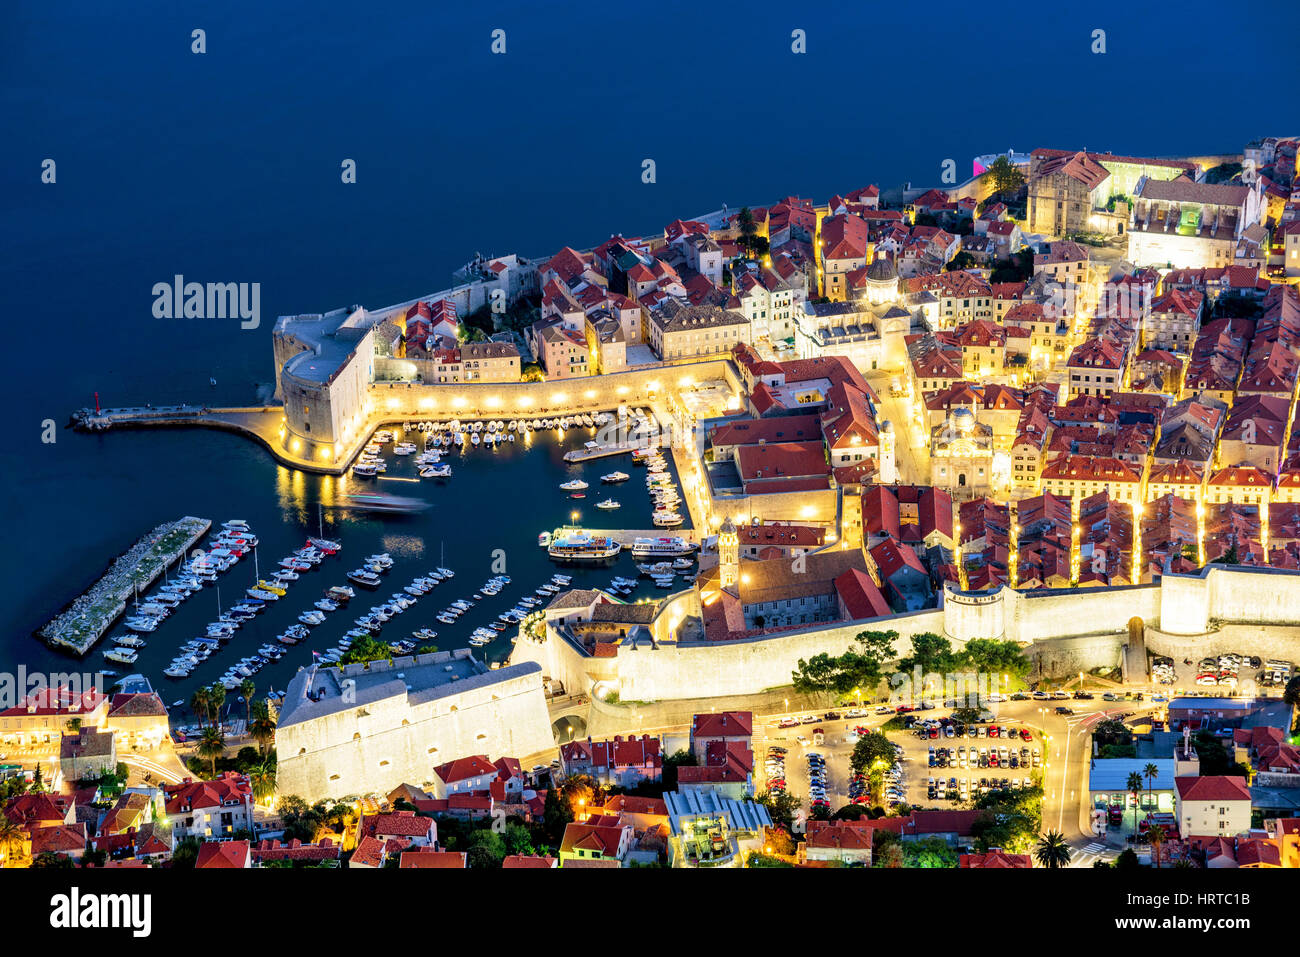 Aerial view of Dubrovnik old town with harbor at night Stock Photo